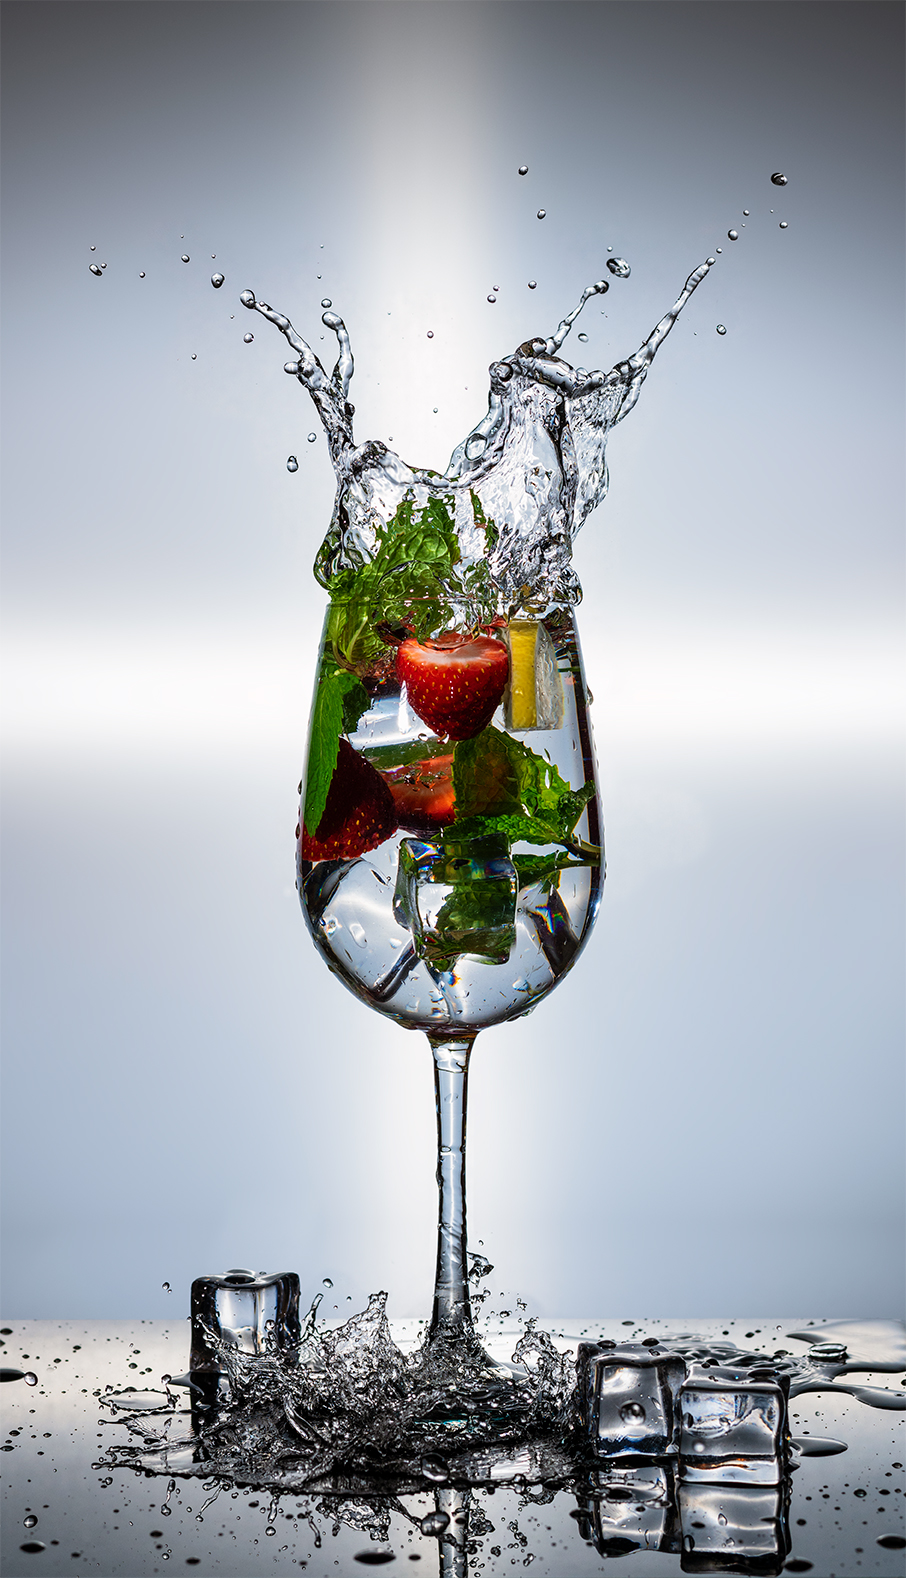 sparkling water and strawberries splash out of glassware